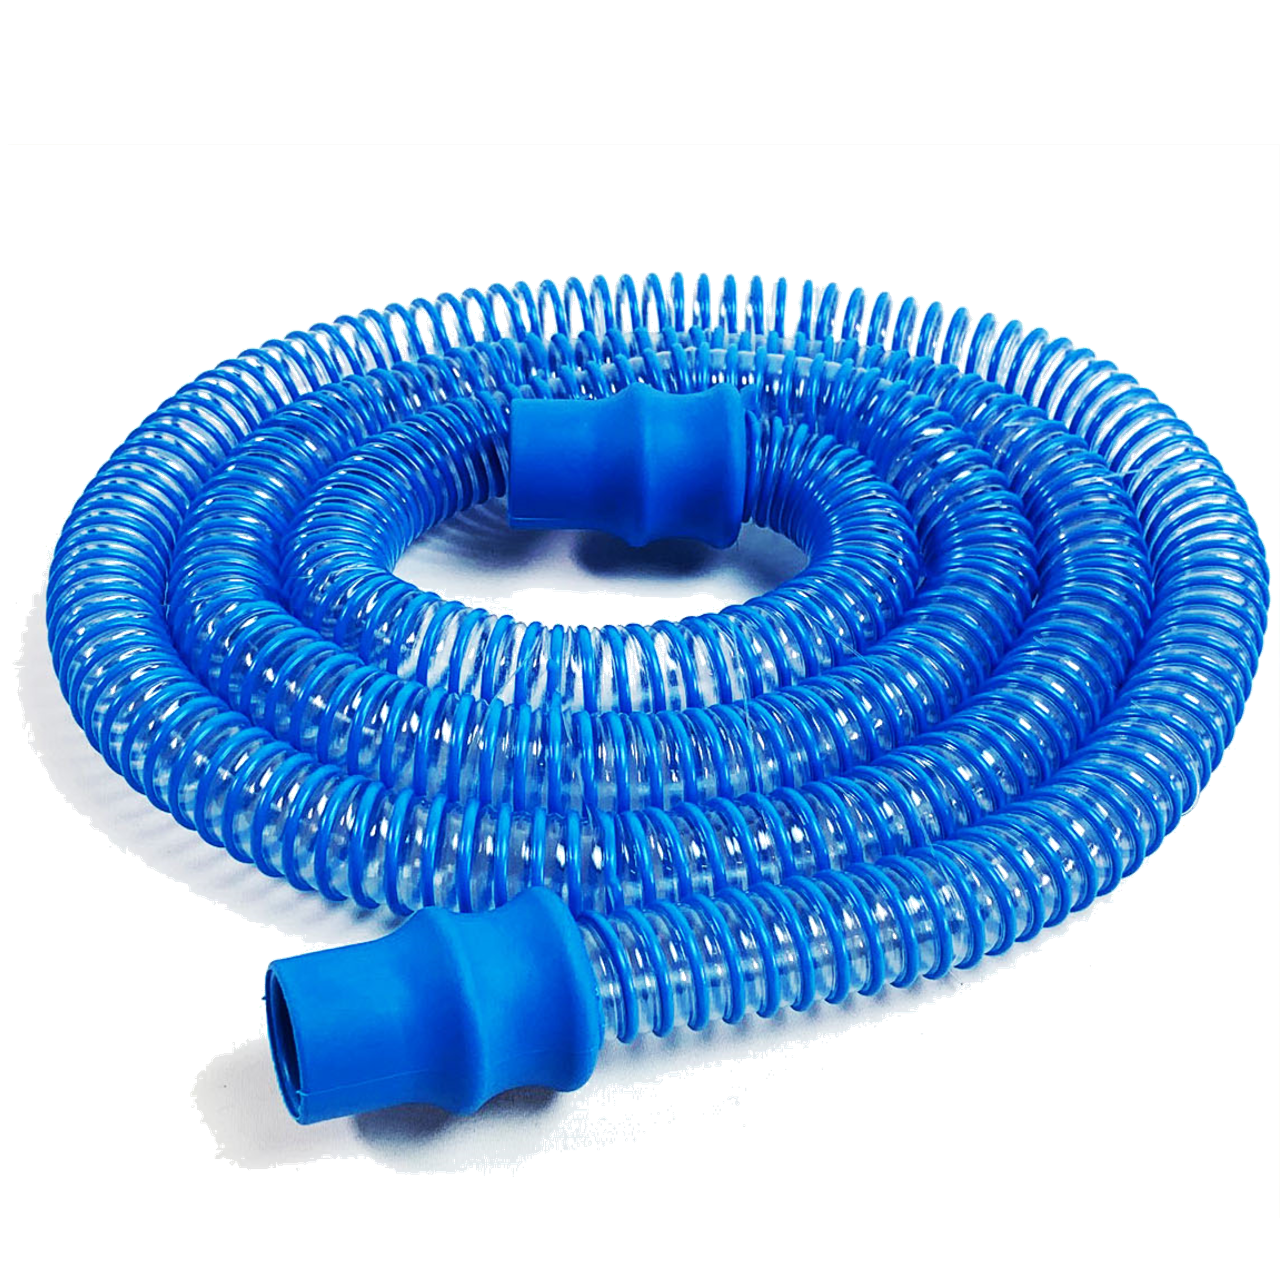 Image of Liviliti Healthy Hose Pro Antimicrobial CPAP Tube (22mm)